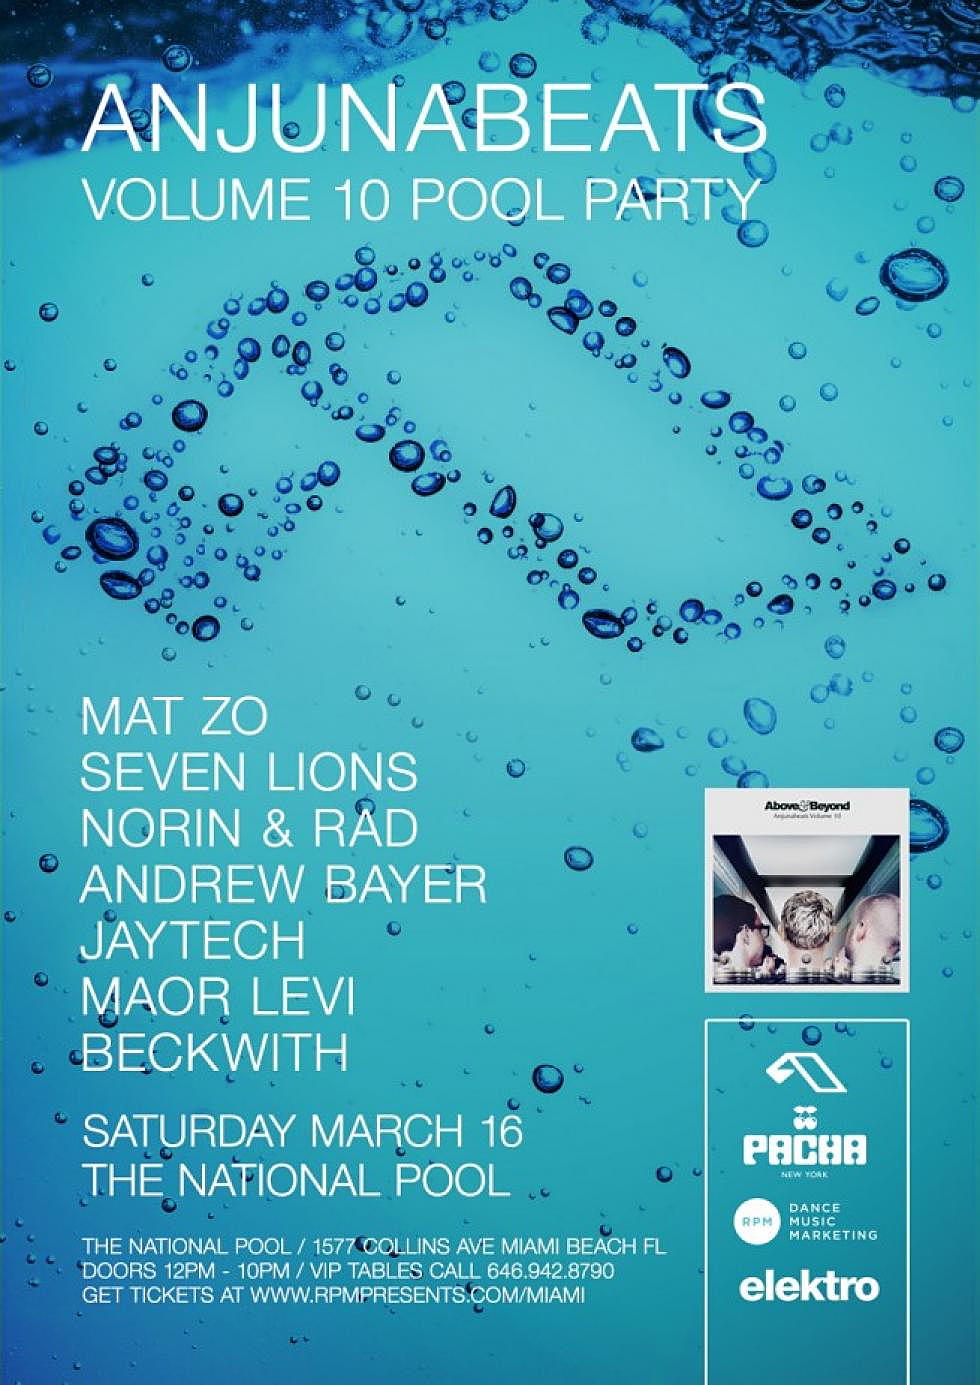 Anjunabeats Volume 10 Pool Party at The National, Miami 3/16 Reviewed